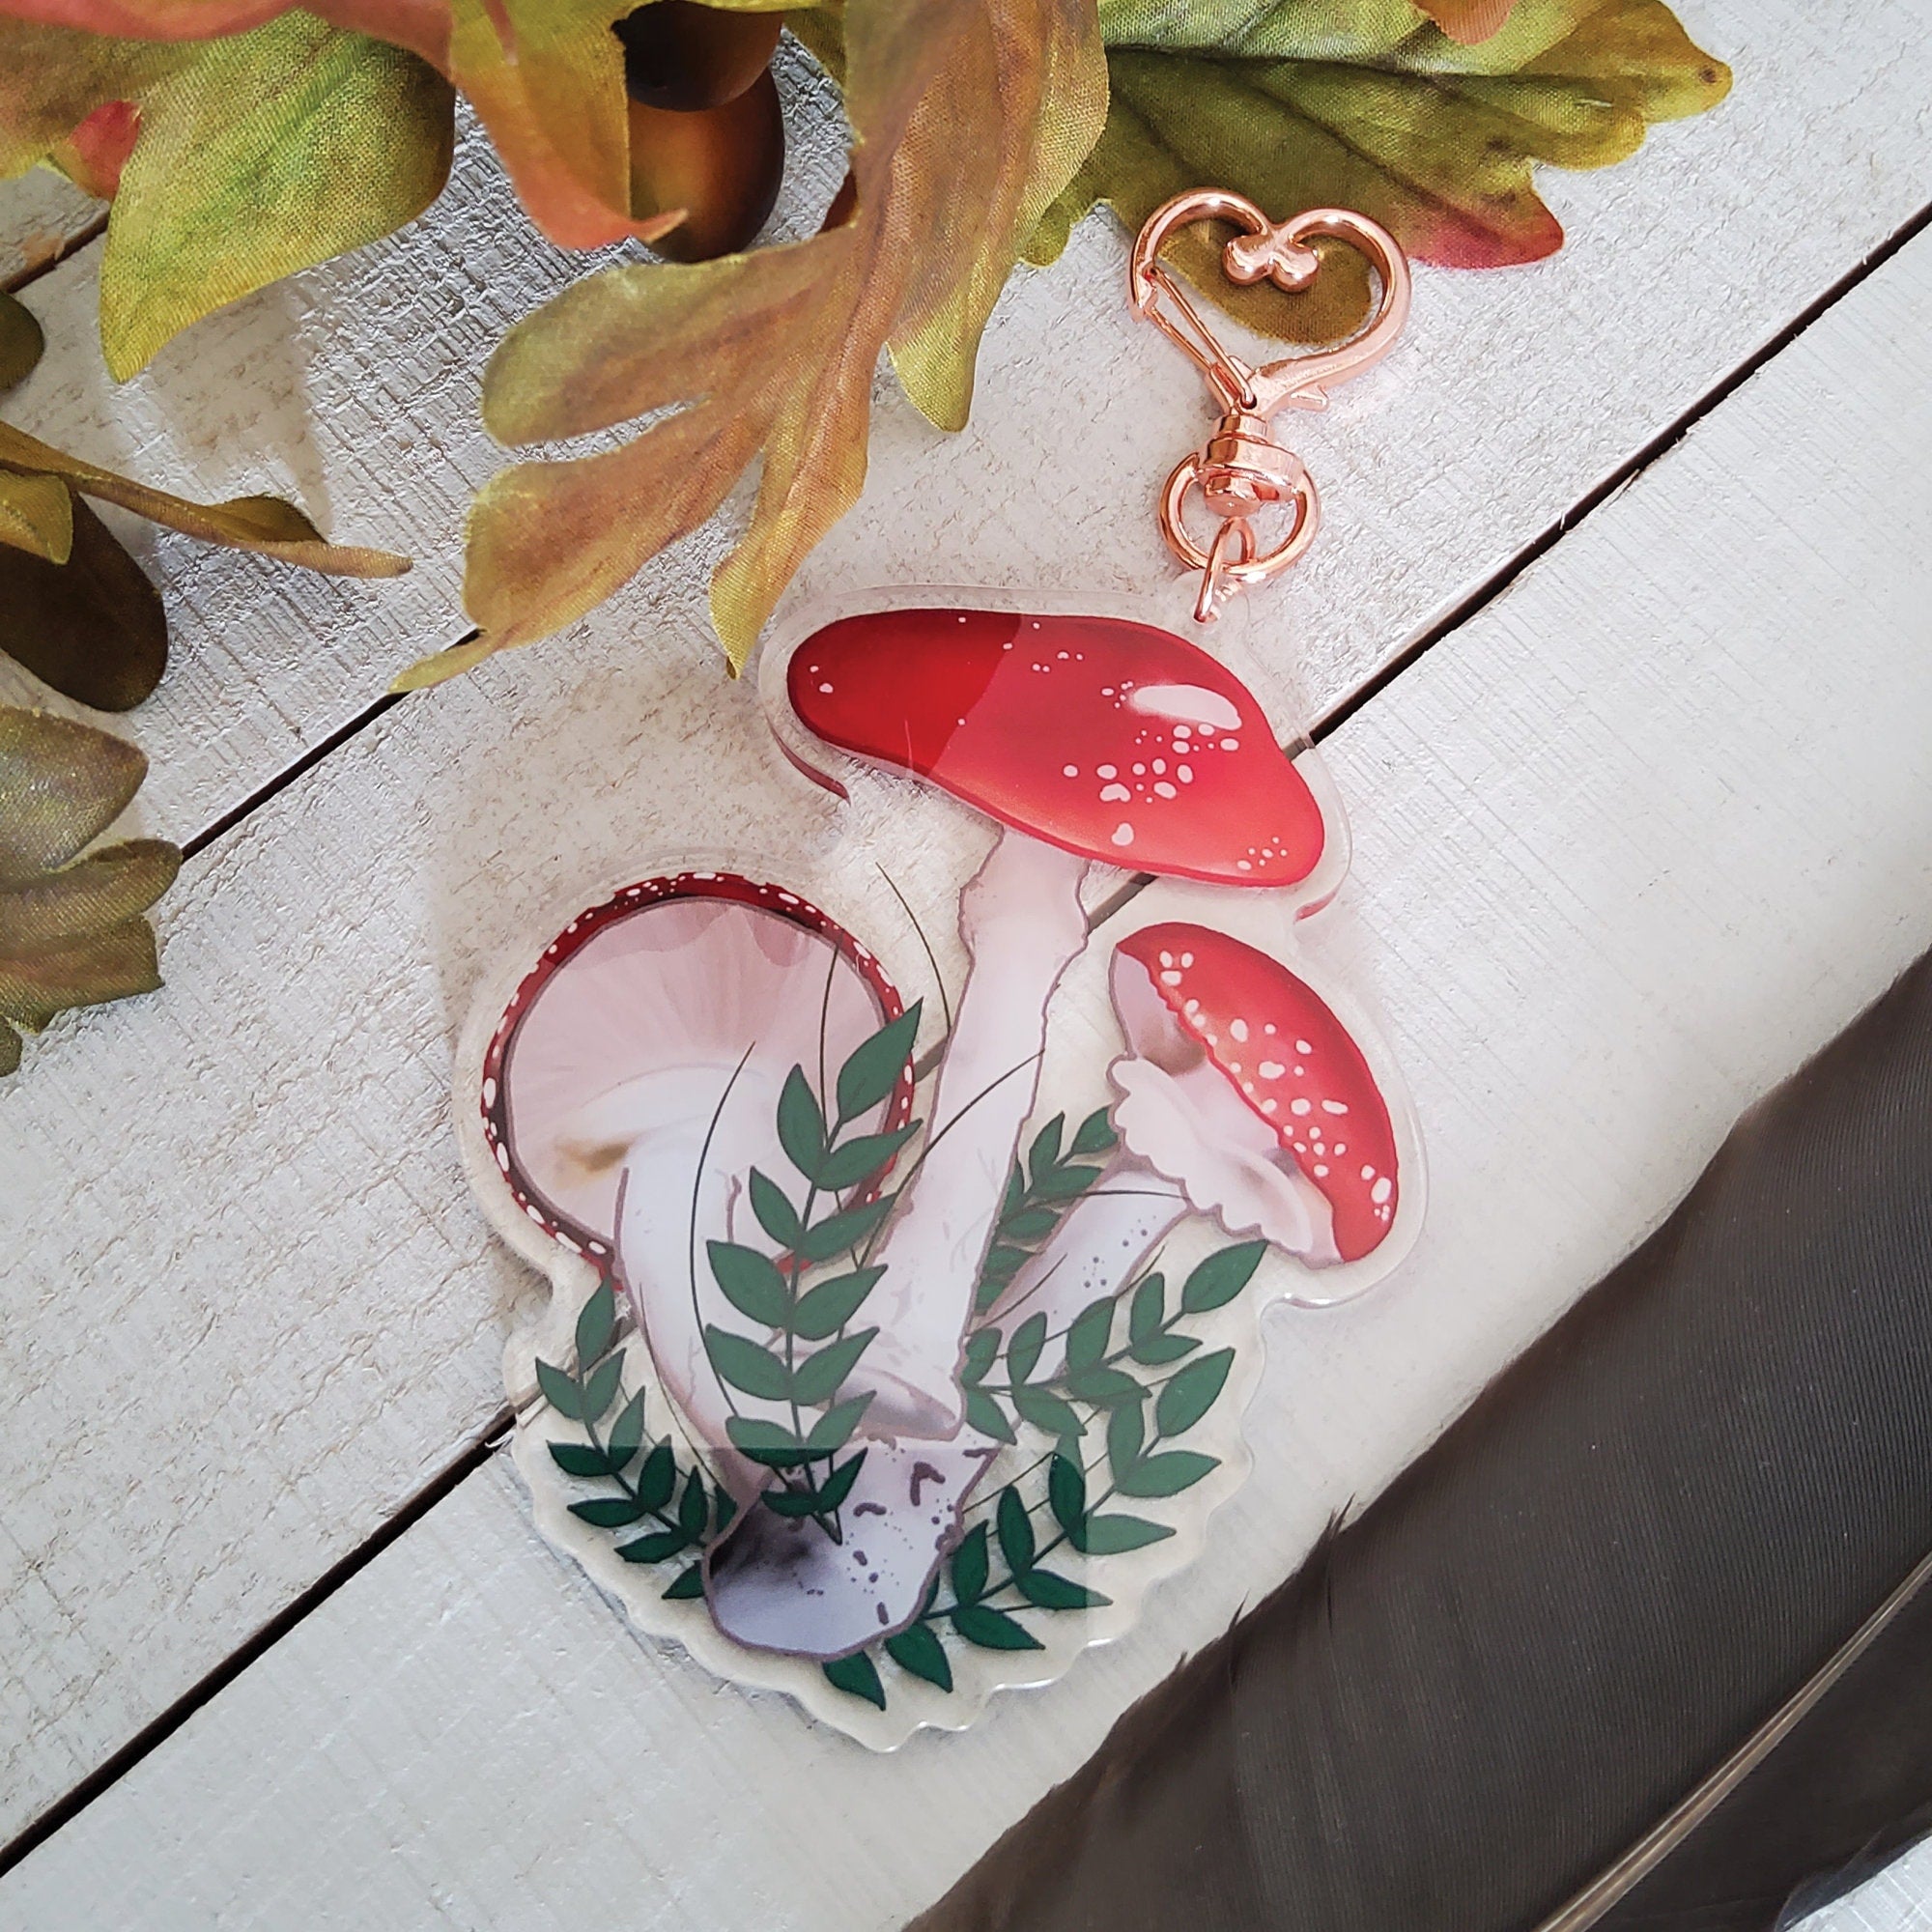 ACRYLIC CHARM Double Sided: Red Mushroom , Red Mushroom Charm , Mushroom Accessory , Red Mushroom Acrylic Accessory , Mushroom Charm